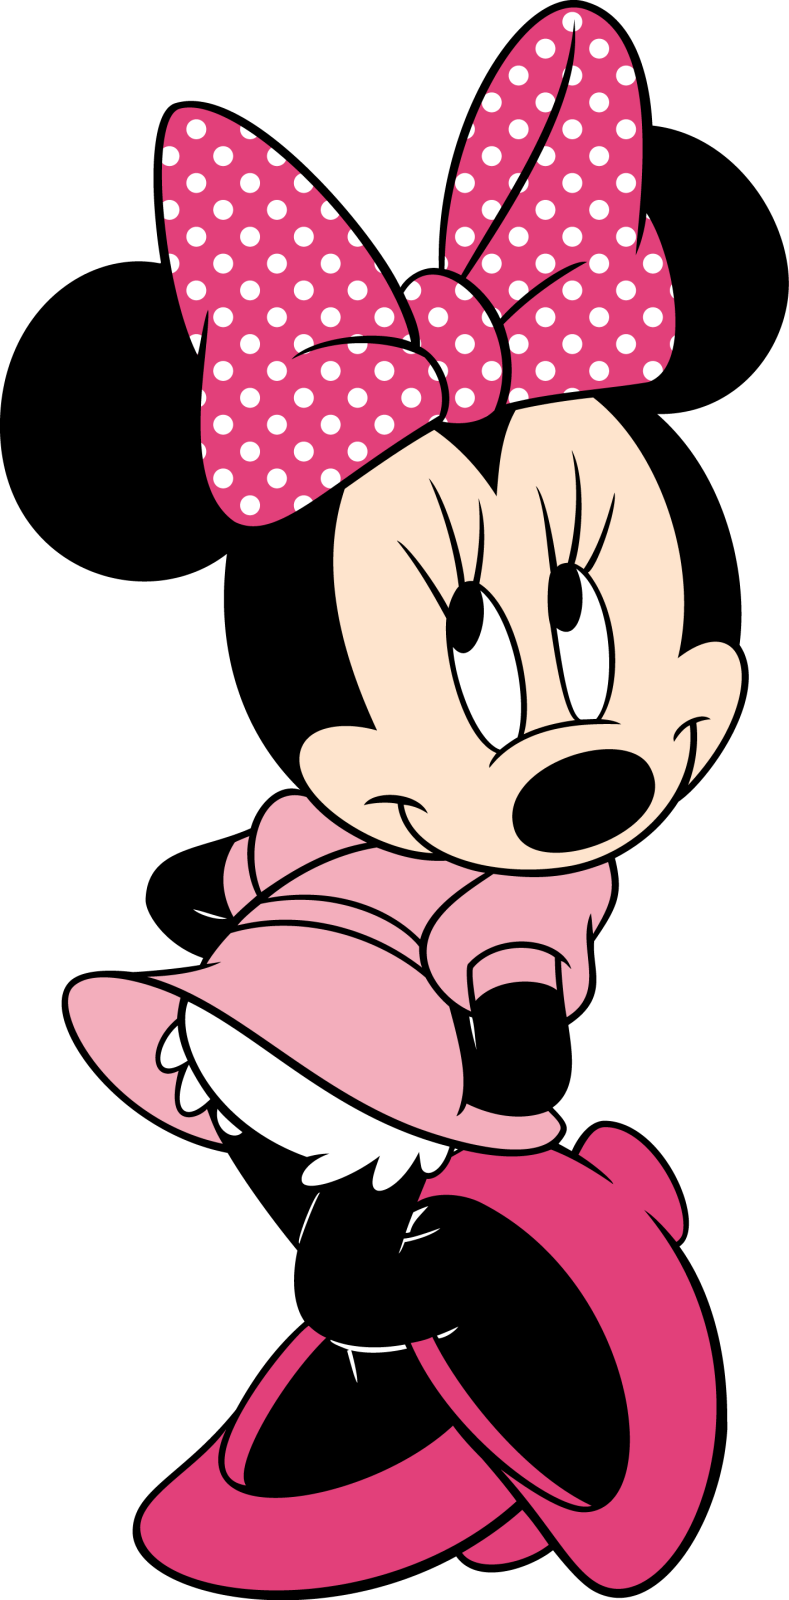 Minnie Mouse PNG Transparent Images | PNG All